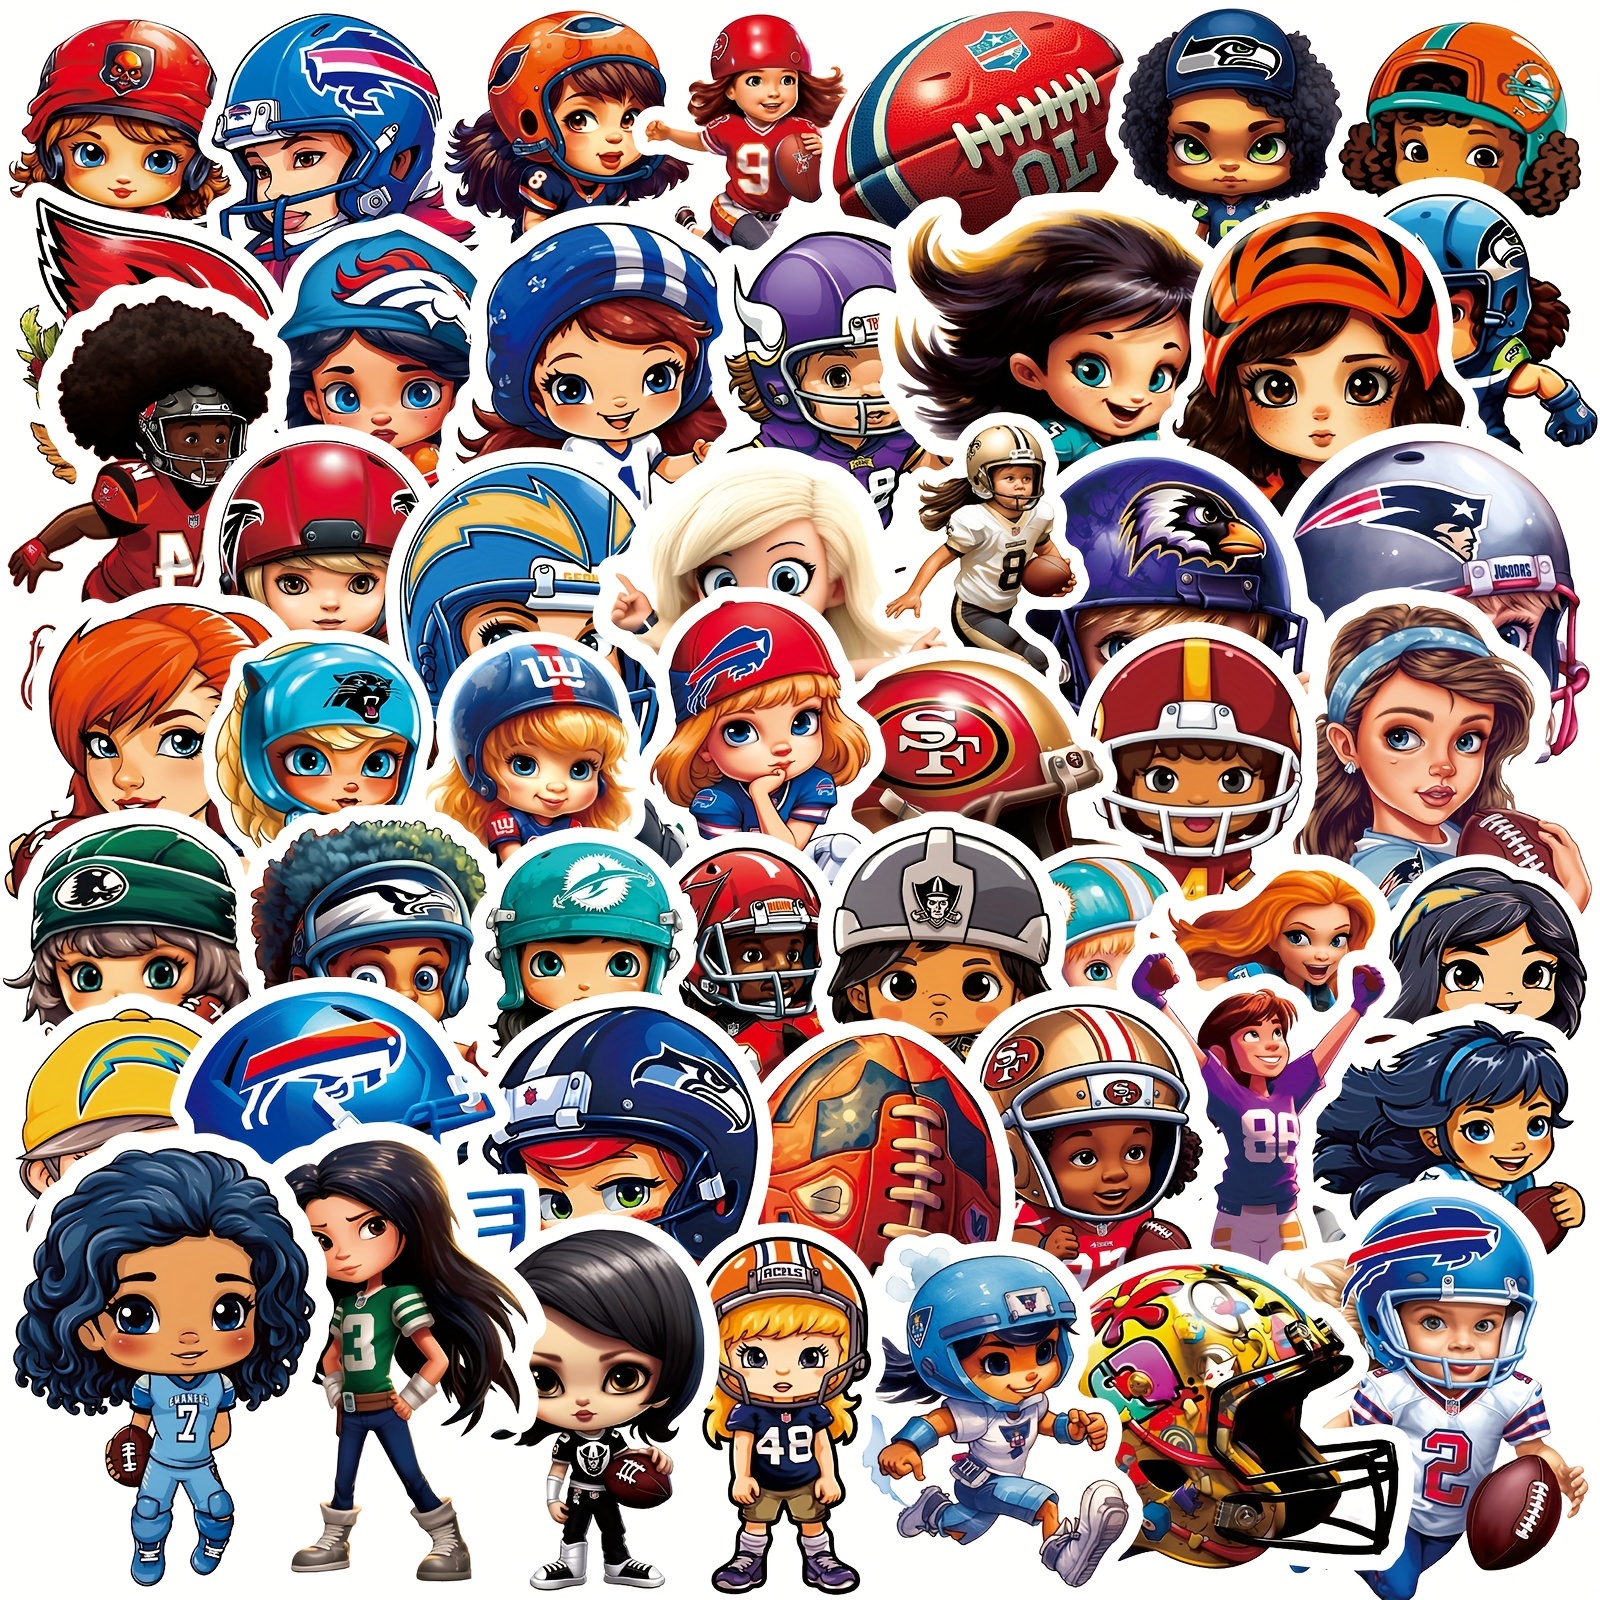  50pcs Baseball Sticker Sports Stickers for Baseball Theme Party  Birthday Party Supplies,Teens Decorations Stickers for Laptop, Bike Guitar  Motorcycle Luggage Skateboard Stickers Cute Graffiti Decals : Toys & Games